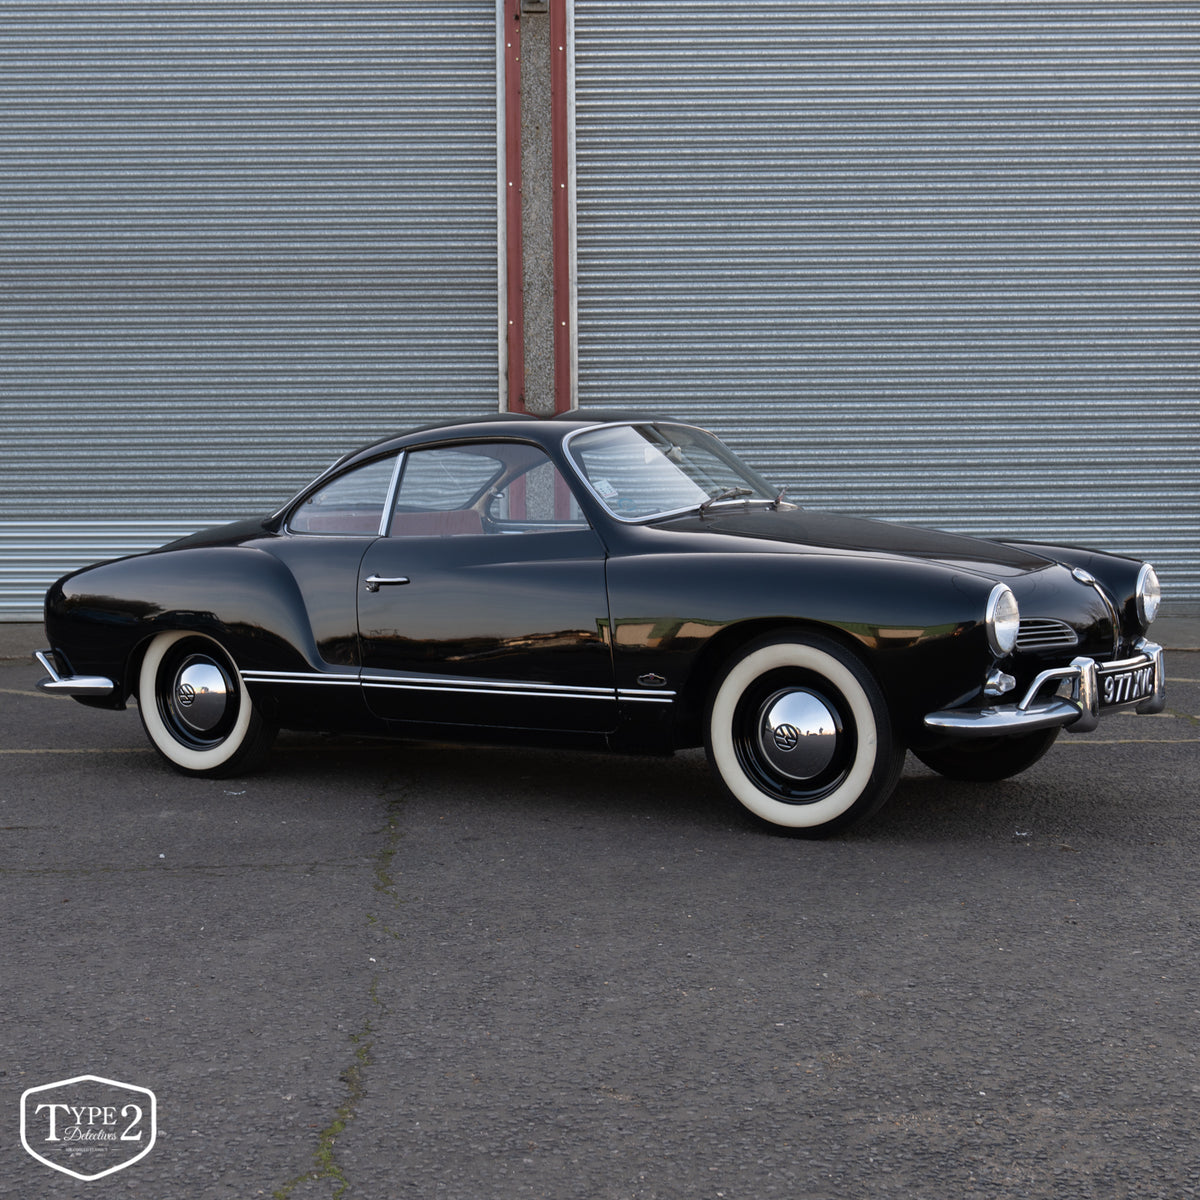 1960 Karmann Ghia - Great example with amazing aged paint